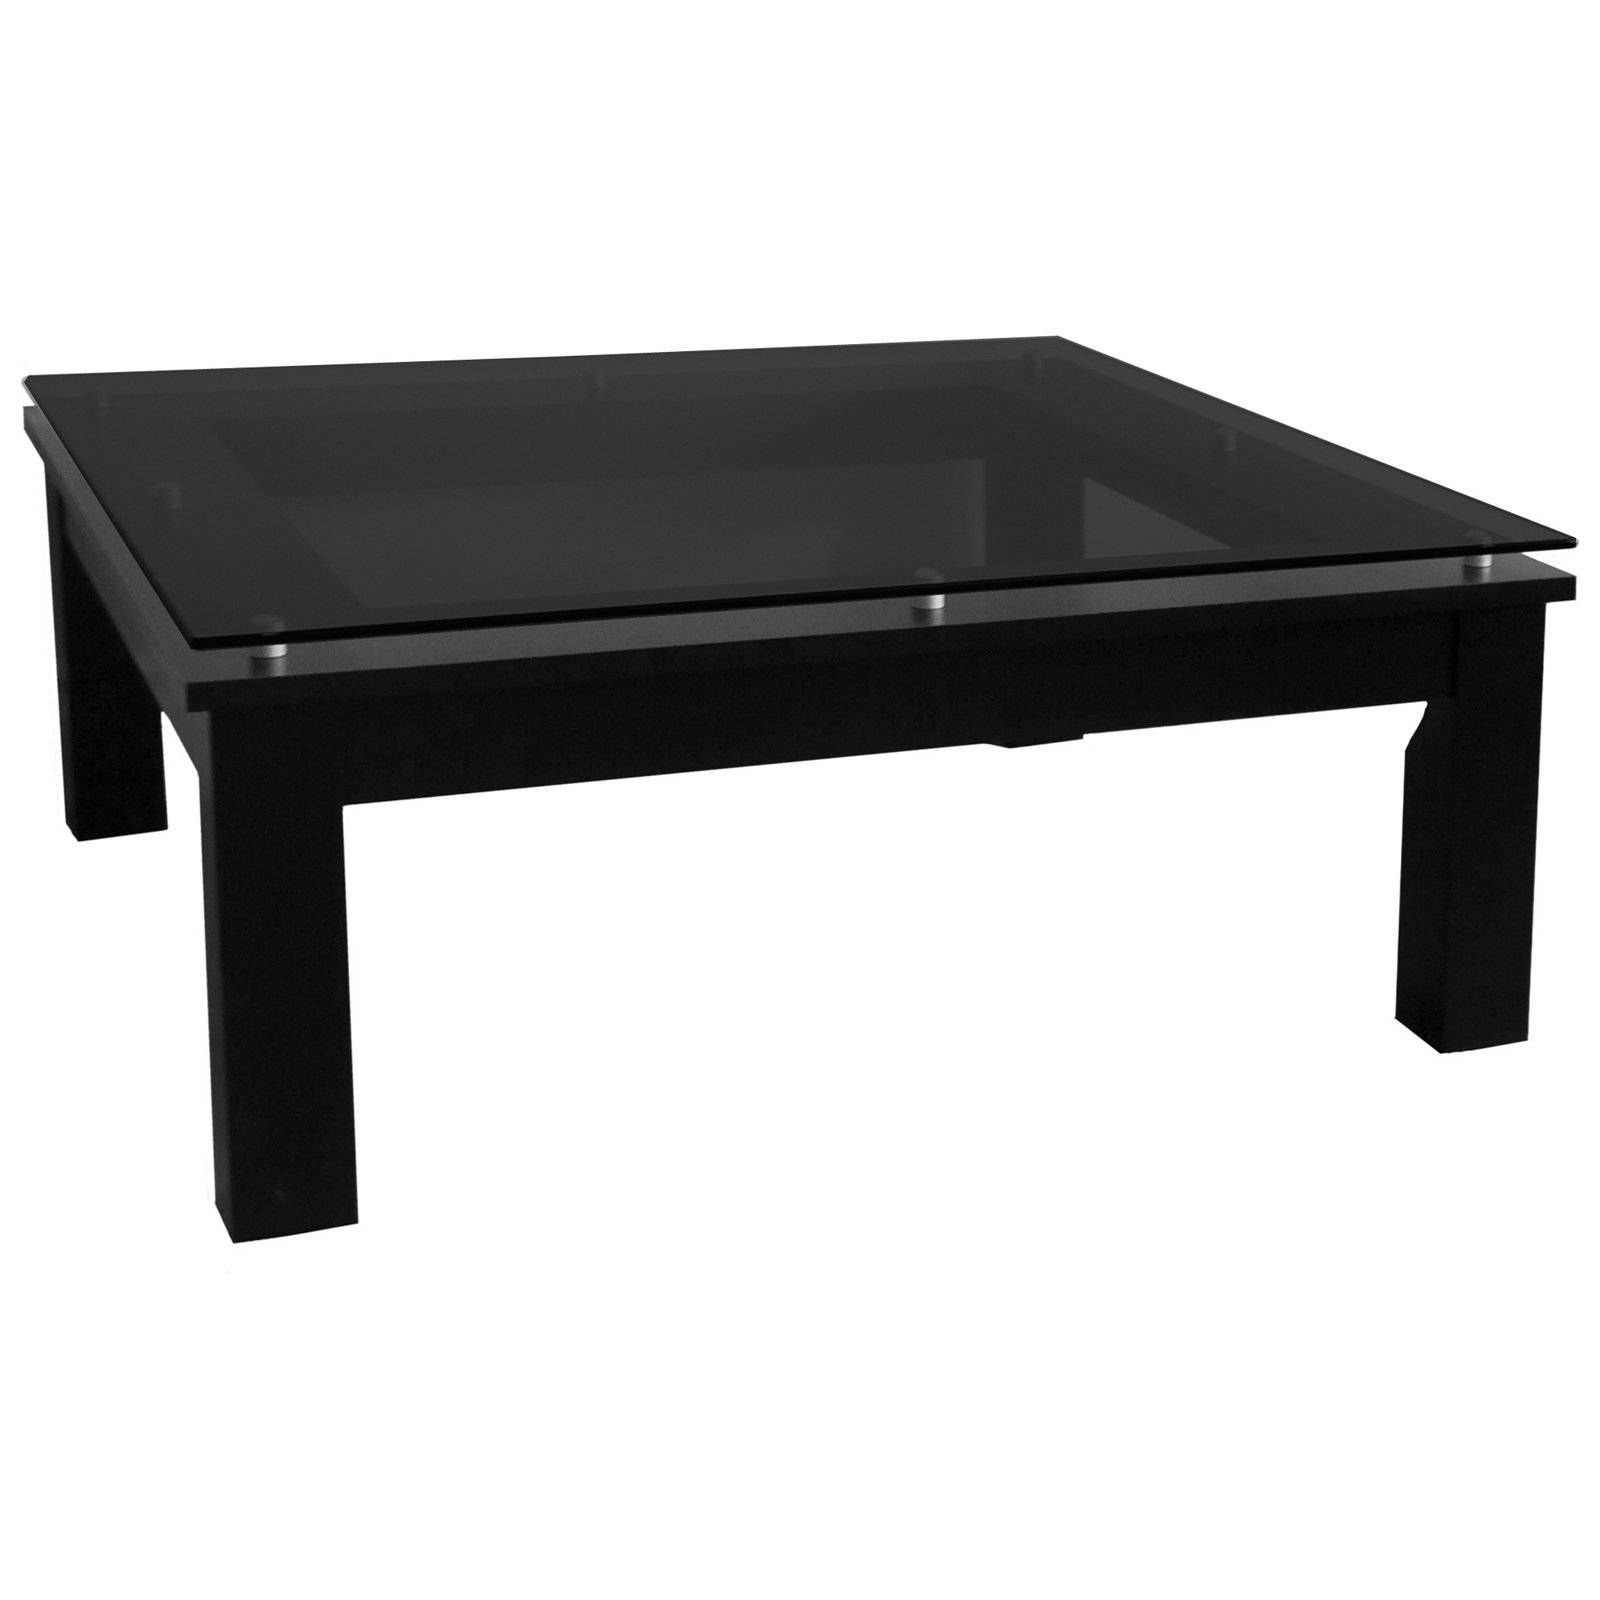 Stylish Extra Large Black Square Coffee Table For Living Room With Intended For Square Dark Wood Coffee Tables (View 12 of 30)